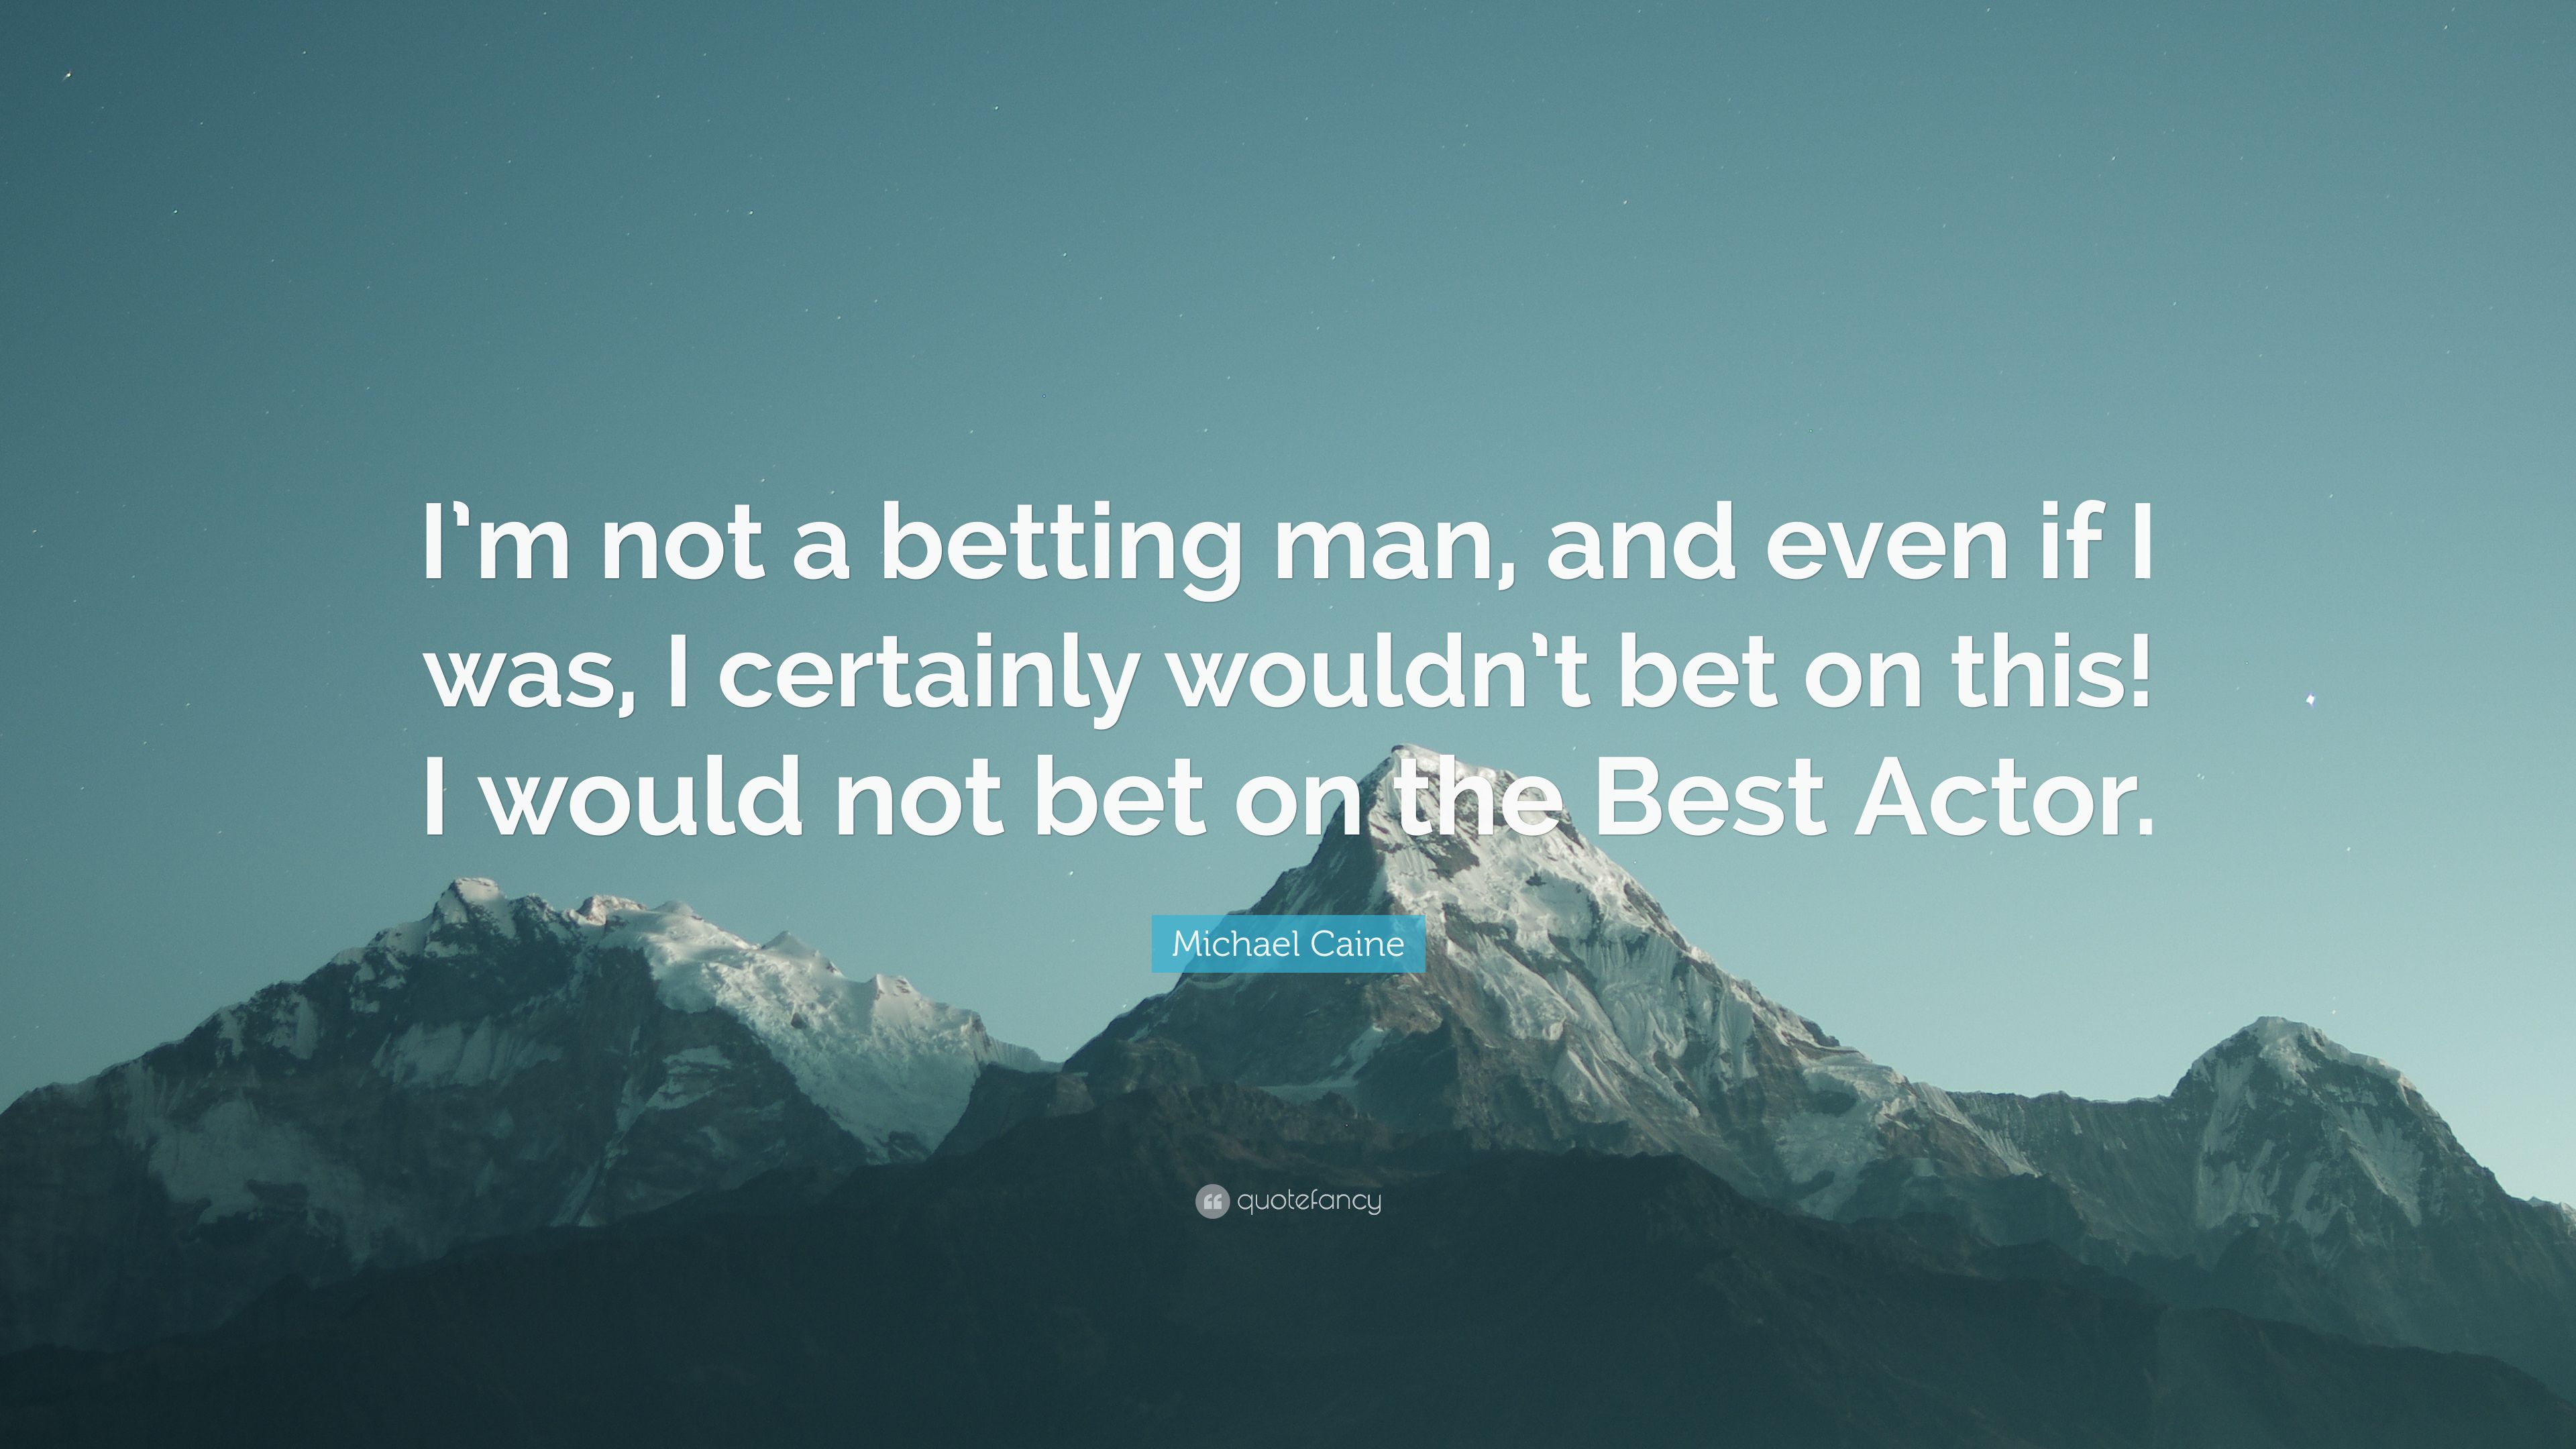 Michael Caine Quote: “I'm not a betting man, and even if I was, I certainly wouldn't bet on this! I would not bet on the Best Actor.” (7 wallpaper)